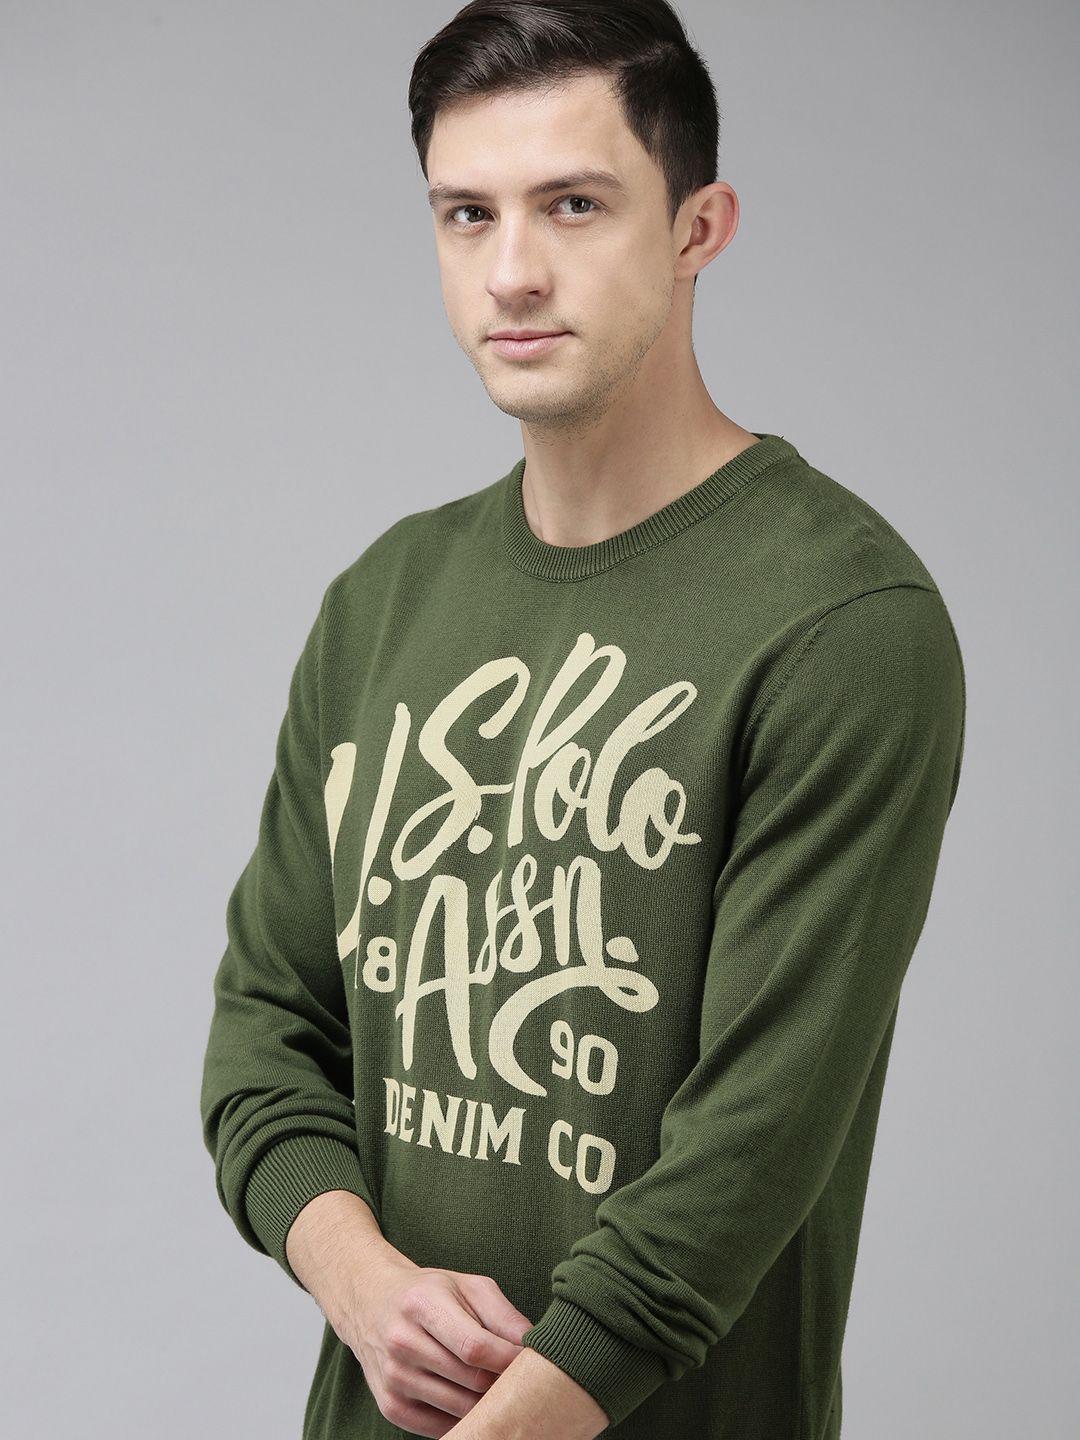 u-s-polo-assn-denim-co-men-olive-green-&-white-typography-printed-pullover-sweater